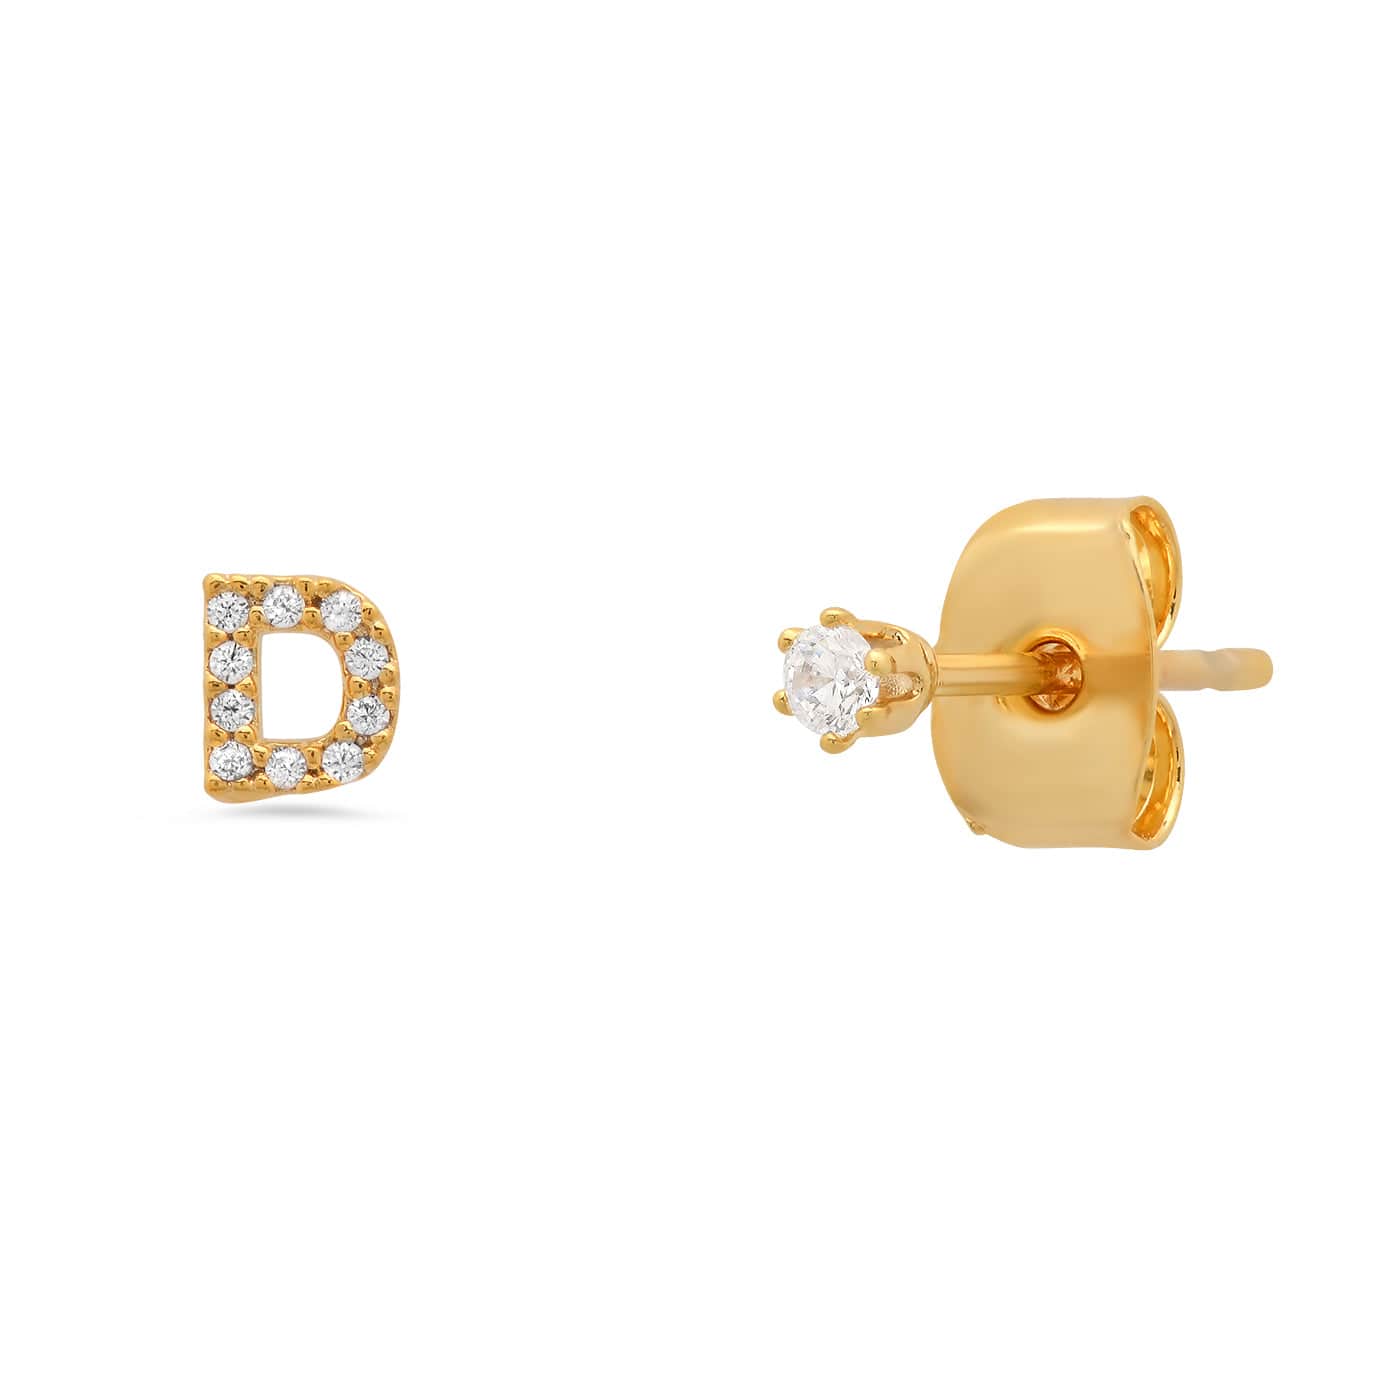 TAI JEWELRY Earrings D Pavé Initial Mismatched Earrings